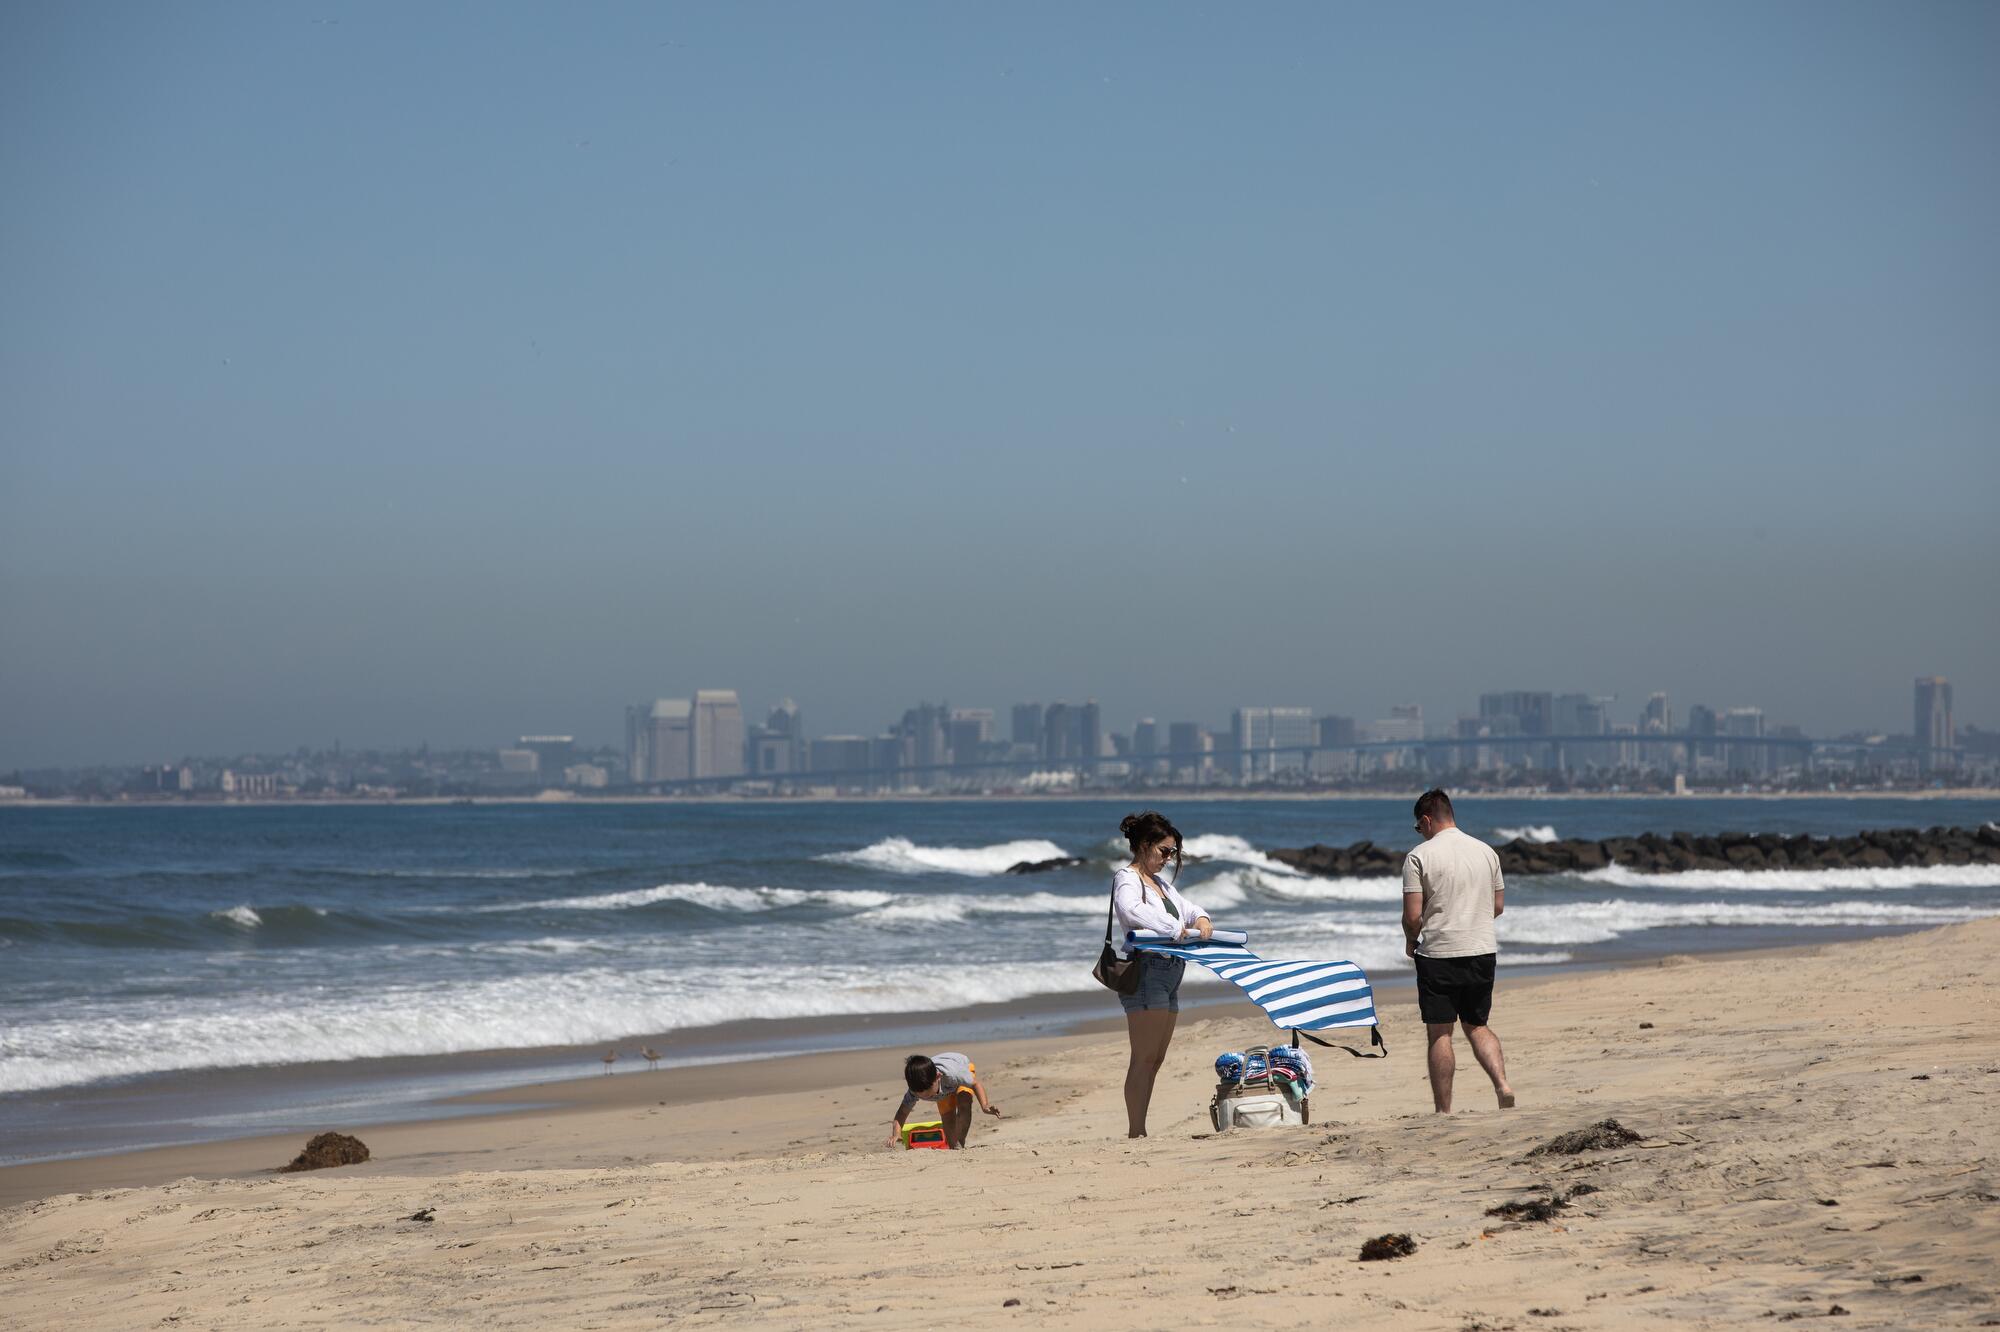 People enjoy a warm day on the sand April 9 in Imperial Beach.